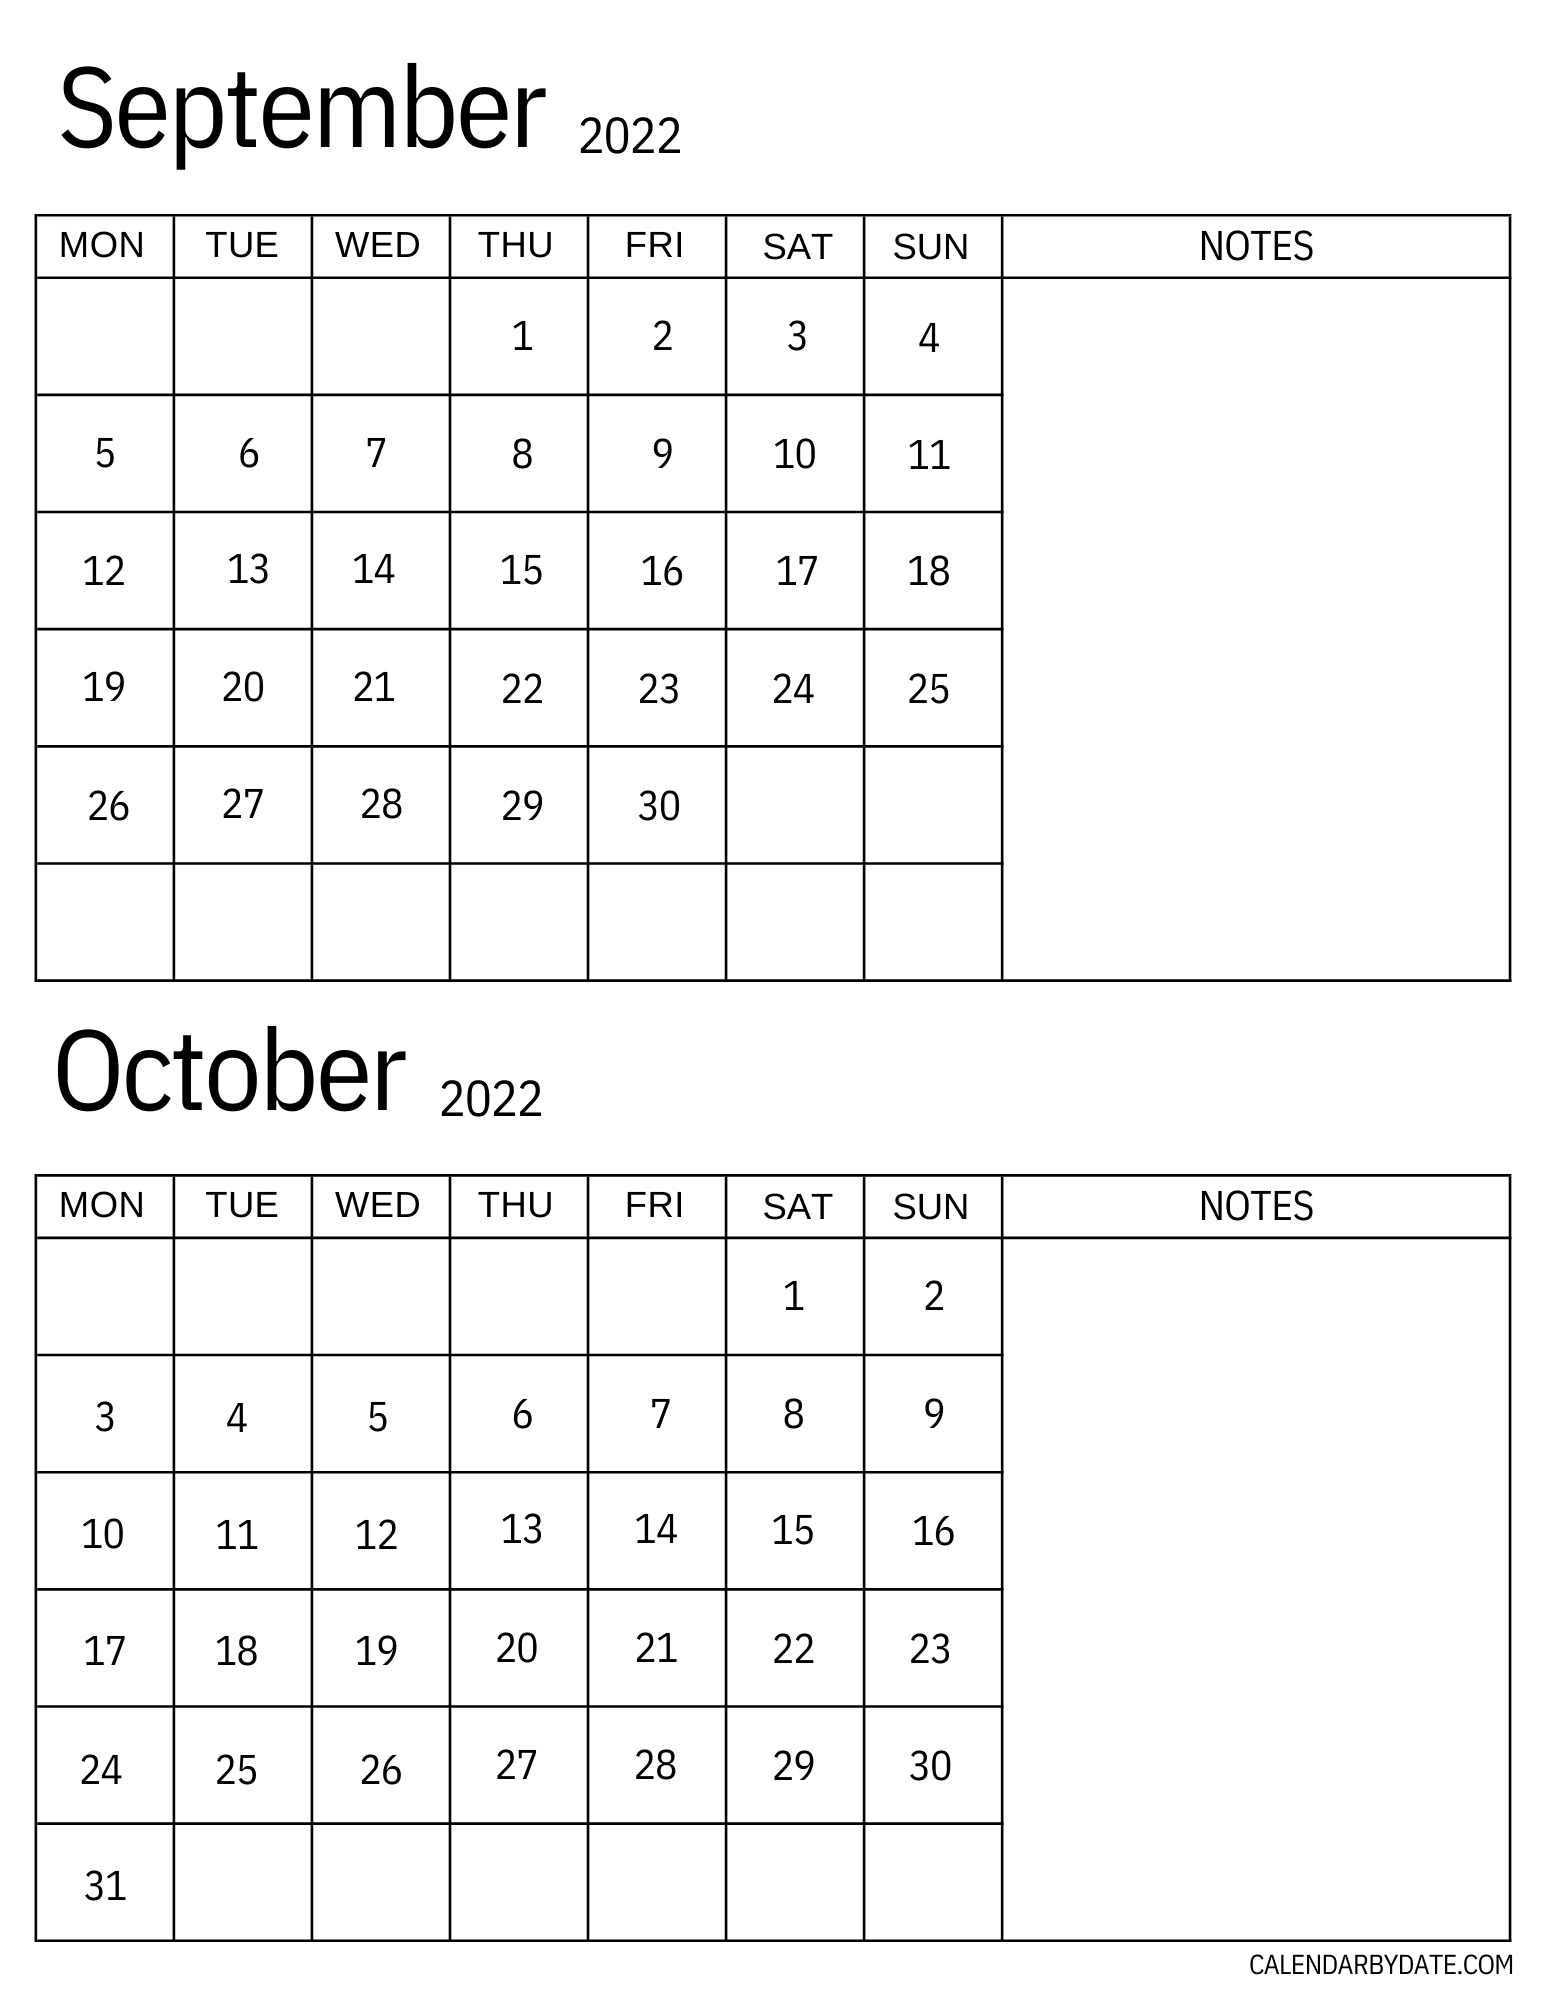 September and October 2022 notes calendar with separate sections for writing notes, to-do lists, tasks and schedules in a portrait layout.